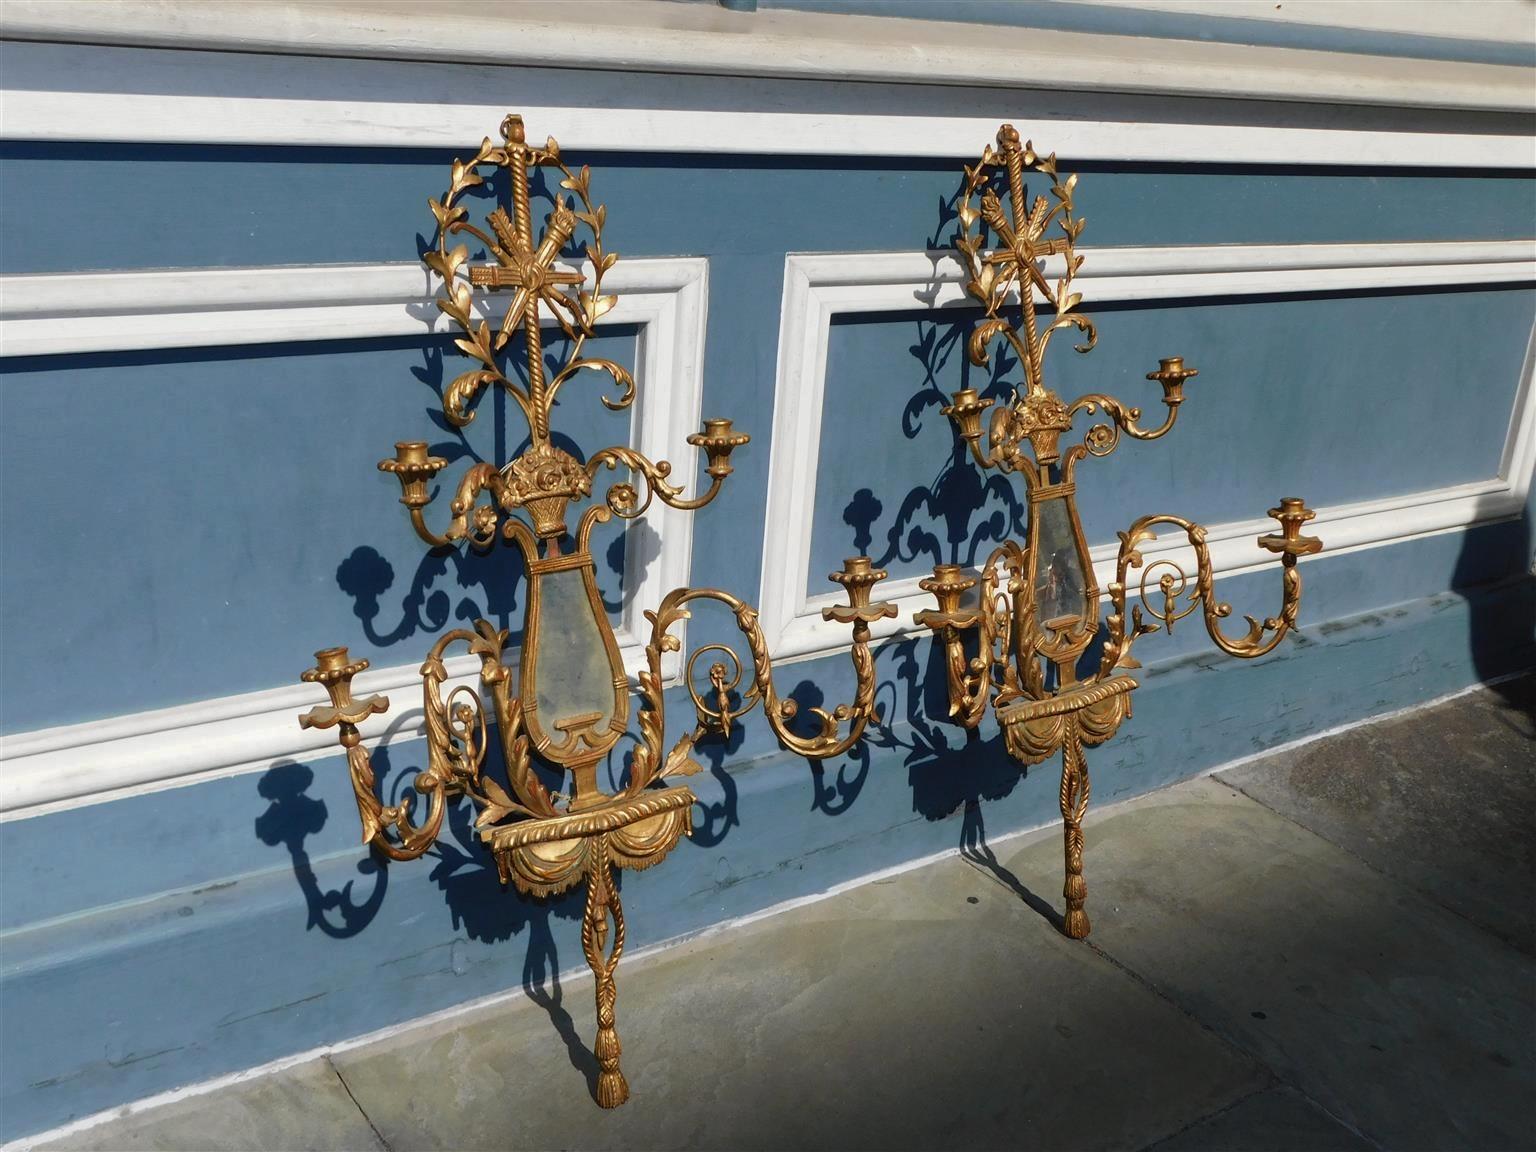 Pair of French gilt wood and Gesso wall sconces with torches and arrows, centered flower basket, four scrolled acanthus medallion arms, flanking harp mirrors, and valences with rope tassels. Early 19th Century. Sconces retain the original mirrors